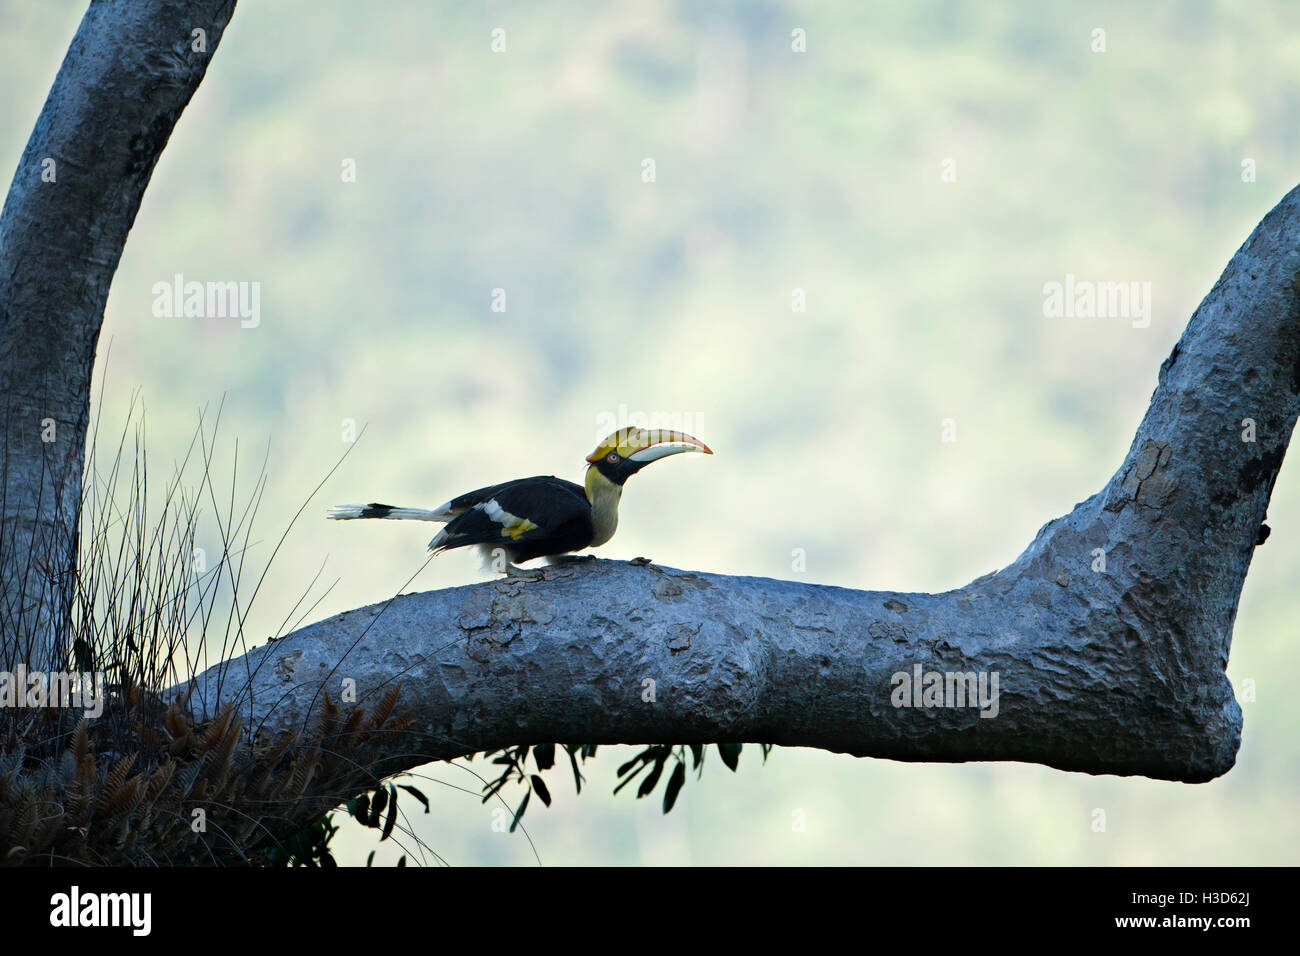 Adult female Great hornbill crouching on the bough of tropical rainforest tree, Langkawi, Malaysia Stock Photo